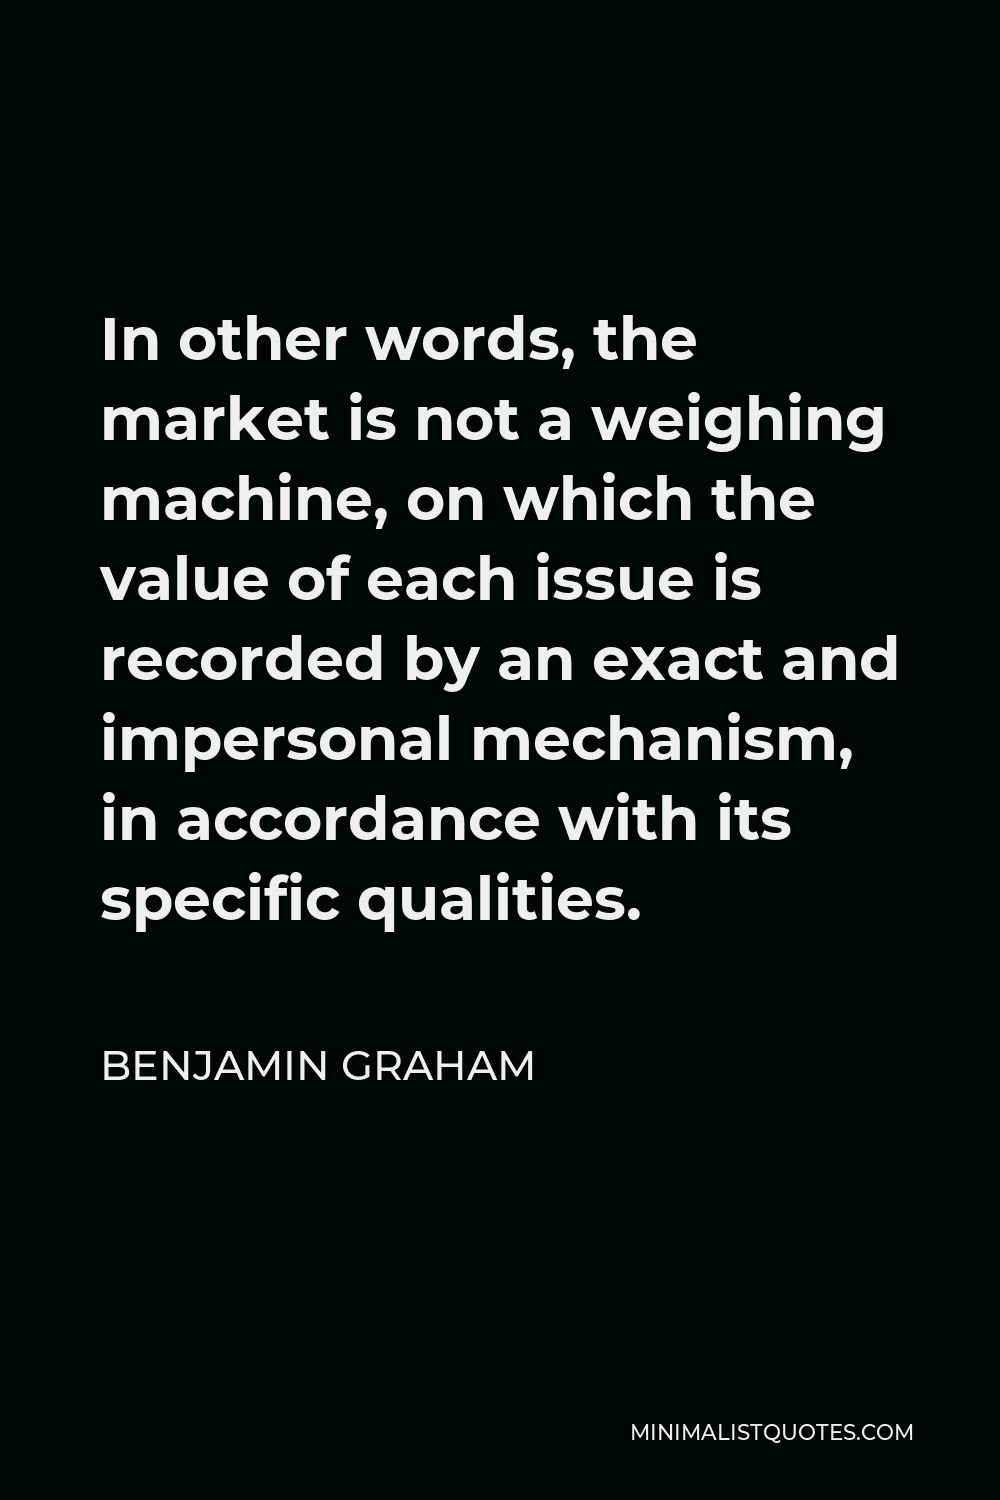 Benjamin Graham Quote - In other words, the market is not a weighing machine, on which the value of each issue is recorded by an exact and impersonal mechanism, in accordance with its specific qualities.